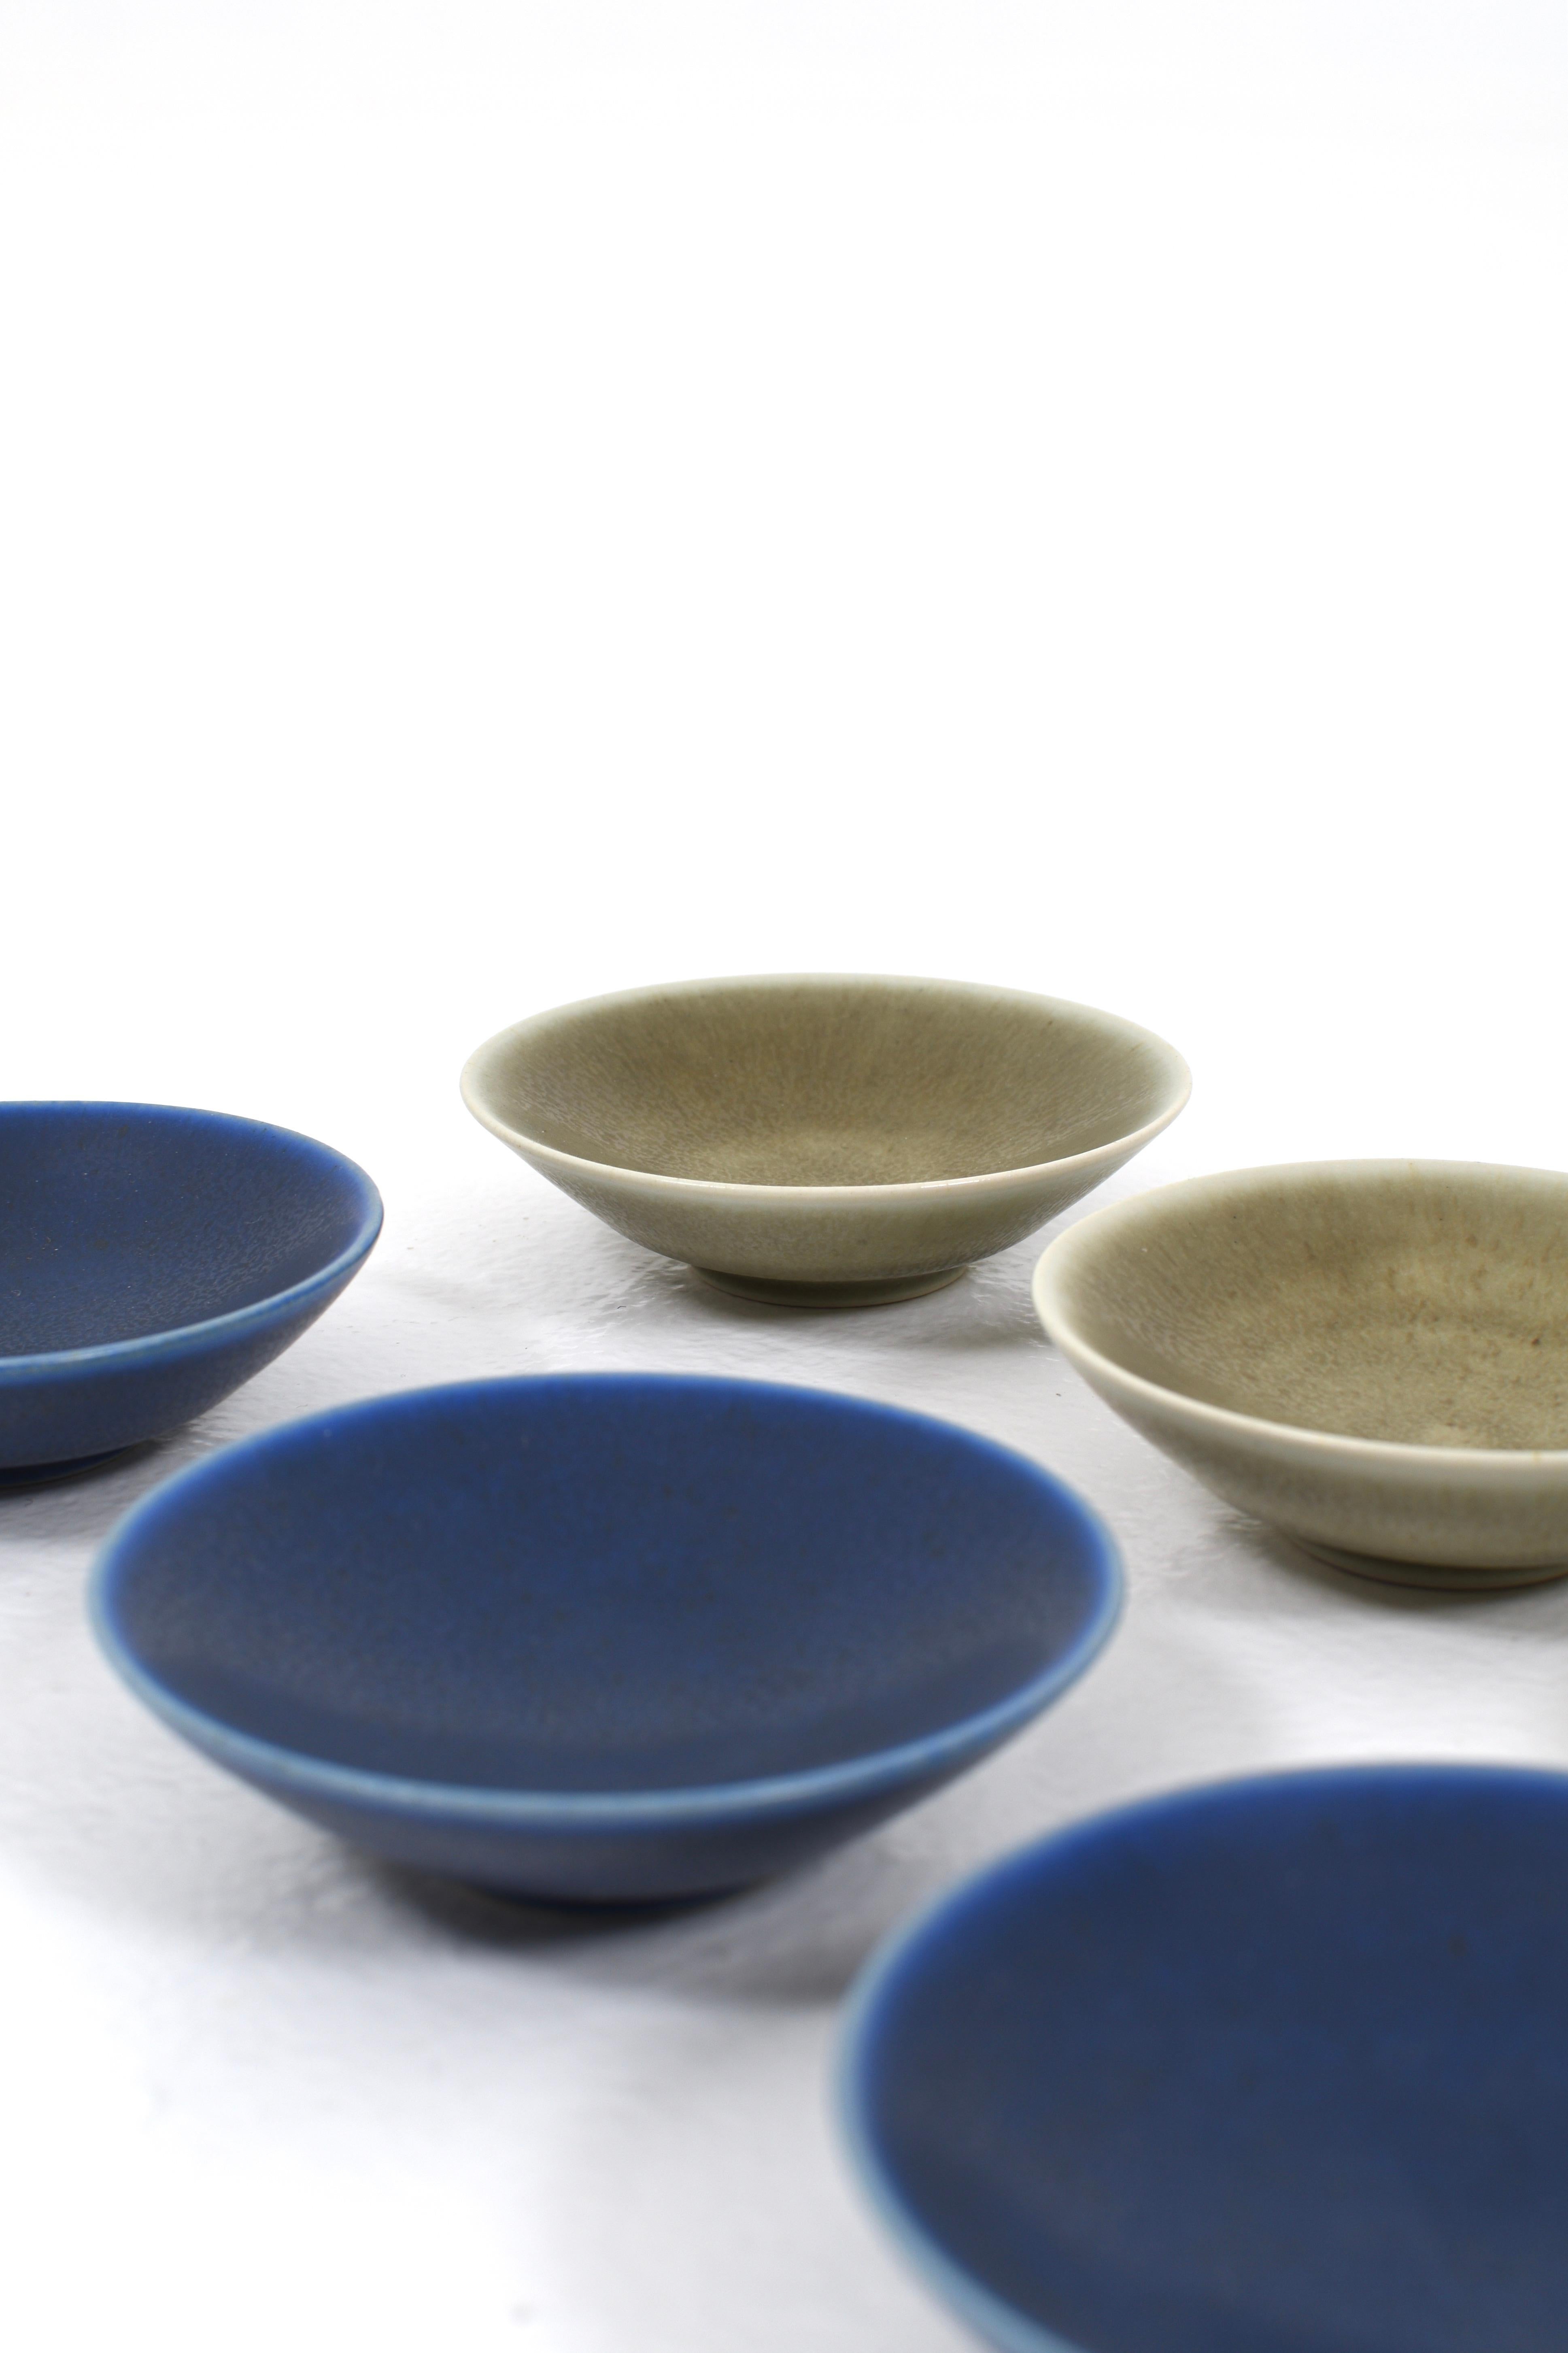 Six small bowls designed by Per Linnemann-Schmidt, Palshus, Denmark.

Three bowls have blue harpsichord glaze and three have green harpsichord glaze. The bowls are signed on the bottom and in very fine condition. All bowls are sold together.